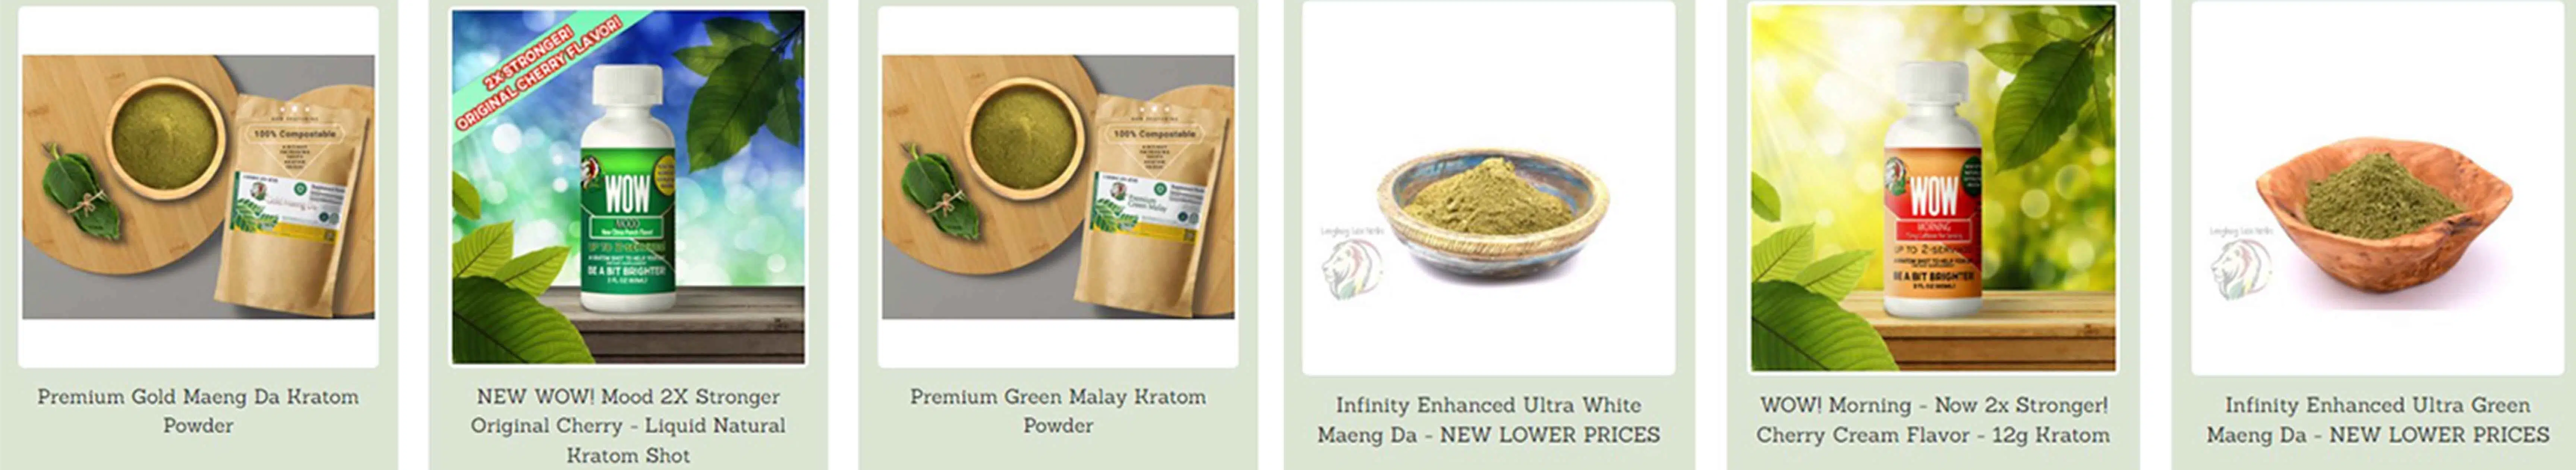 Laughing lion herbs kratom products